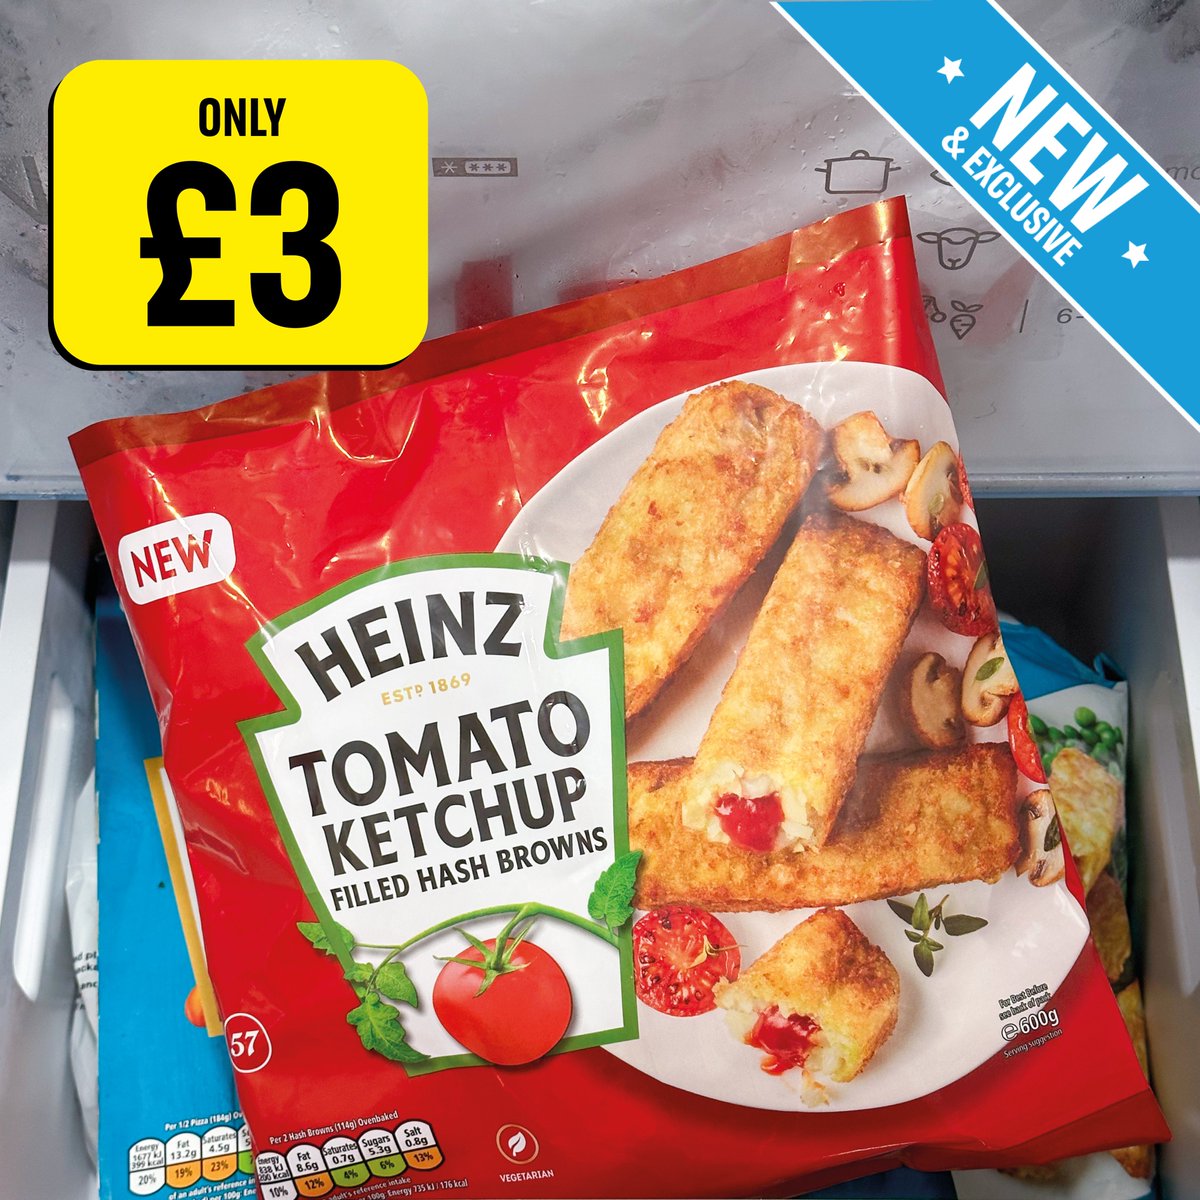 🚨 BRAND NEW AND DELICIOUS! 🚨 If you love hash browns, and adore Heinz Tomato Ketchup, you’ll be OBSESSED with our NEW and EXCLUSIVE @HeinzUK Tomato Ketchup Hash Browns! 🍅😍 #HashBrowns #Heinz #New #Exclusive